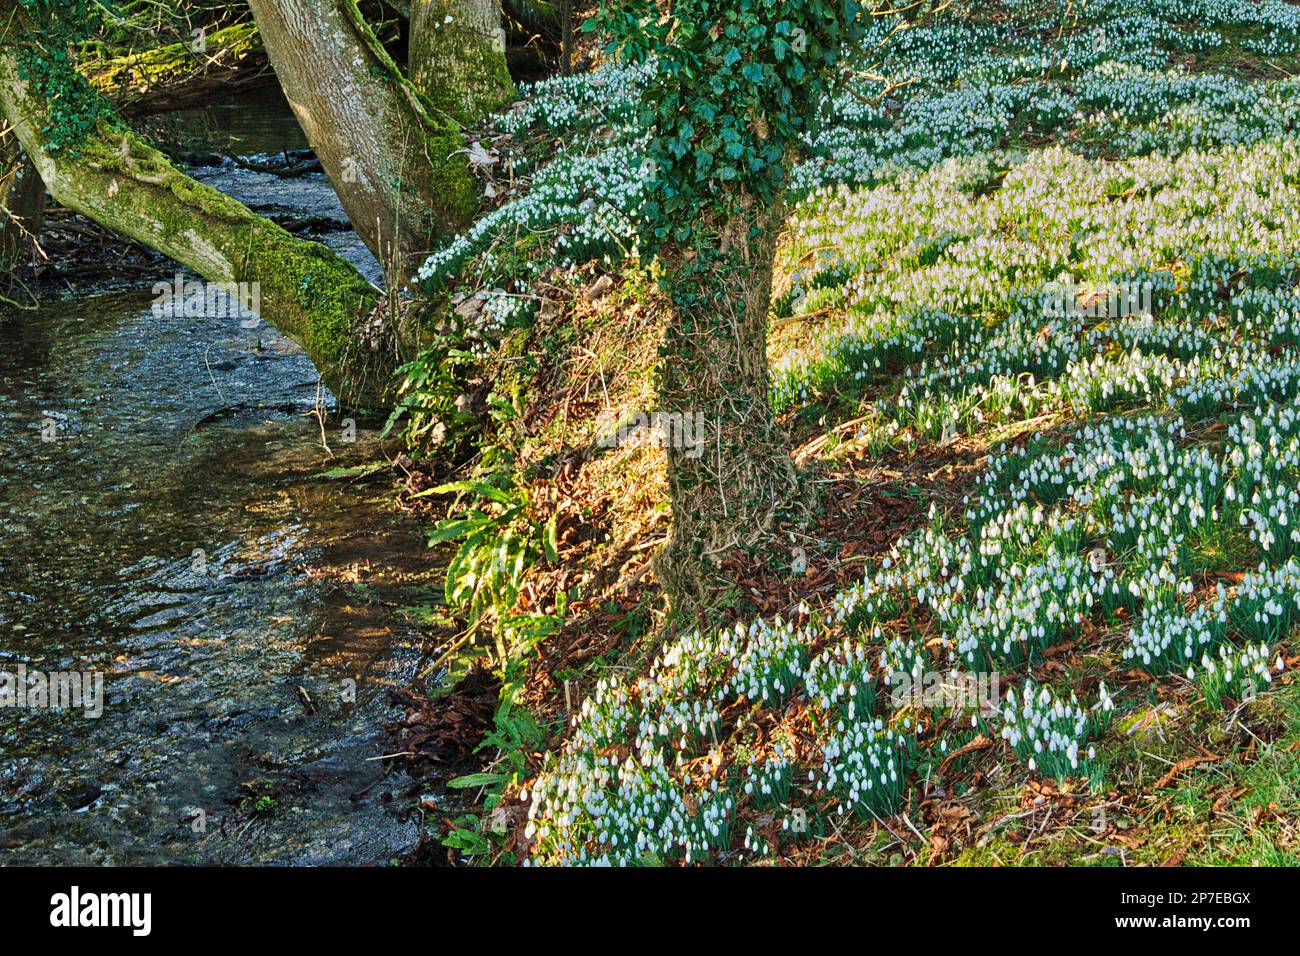 Snowdrops by the River, Welford Park, Berkshire, Royaume-Uni Banque D'Images